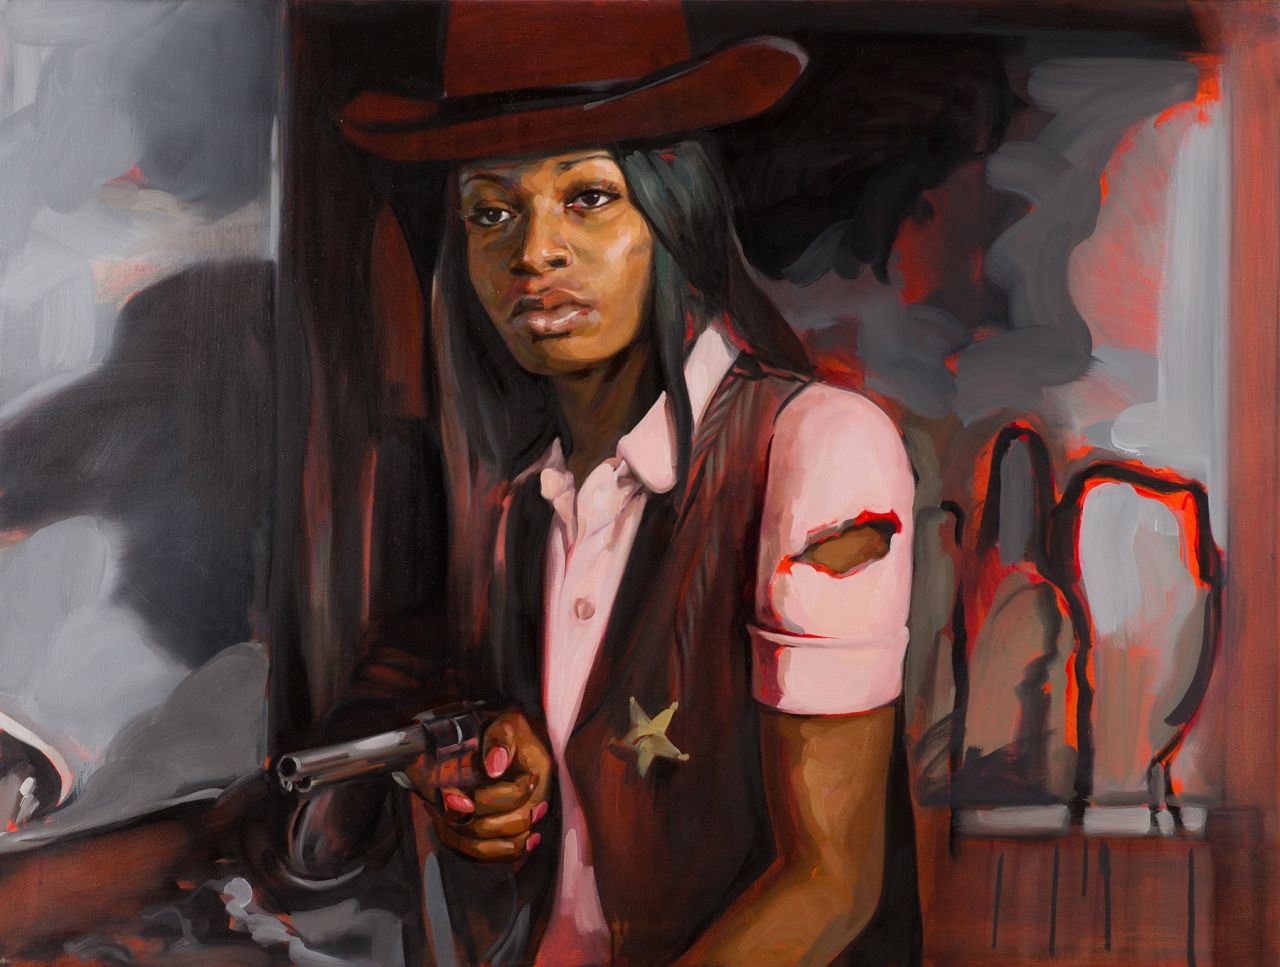 Felice House, Liakesha Cooper in High Noon, 2013. Oil on canvas.